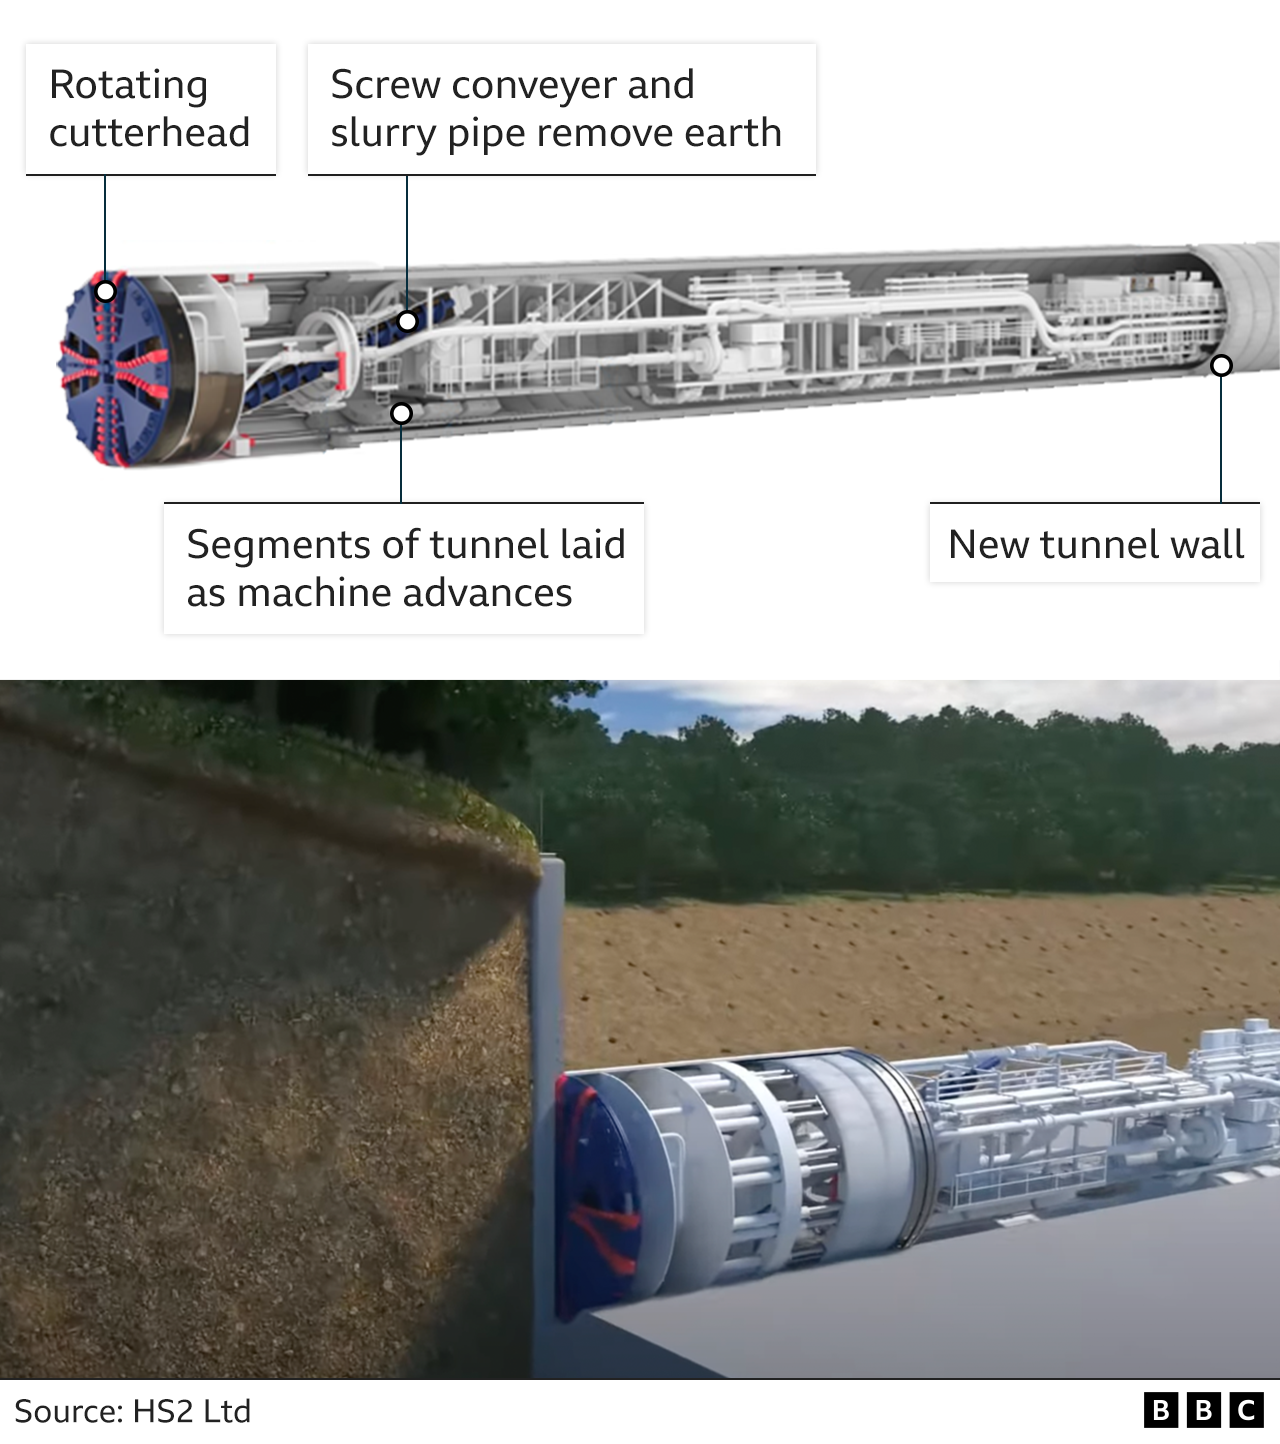 Graphic showing the boring machines being used to build HS2, highlighting the rotating cutterhead, screw conveyer and slurry pipe which remove earth, where the segments of tunnel are inside the machine and after they have been fitted